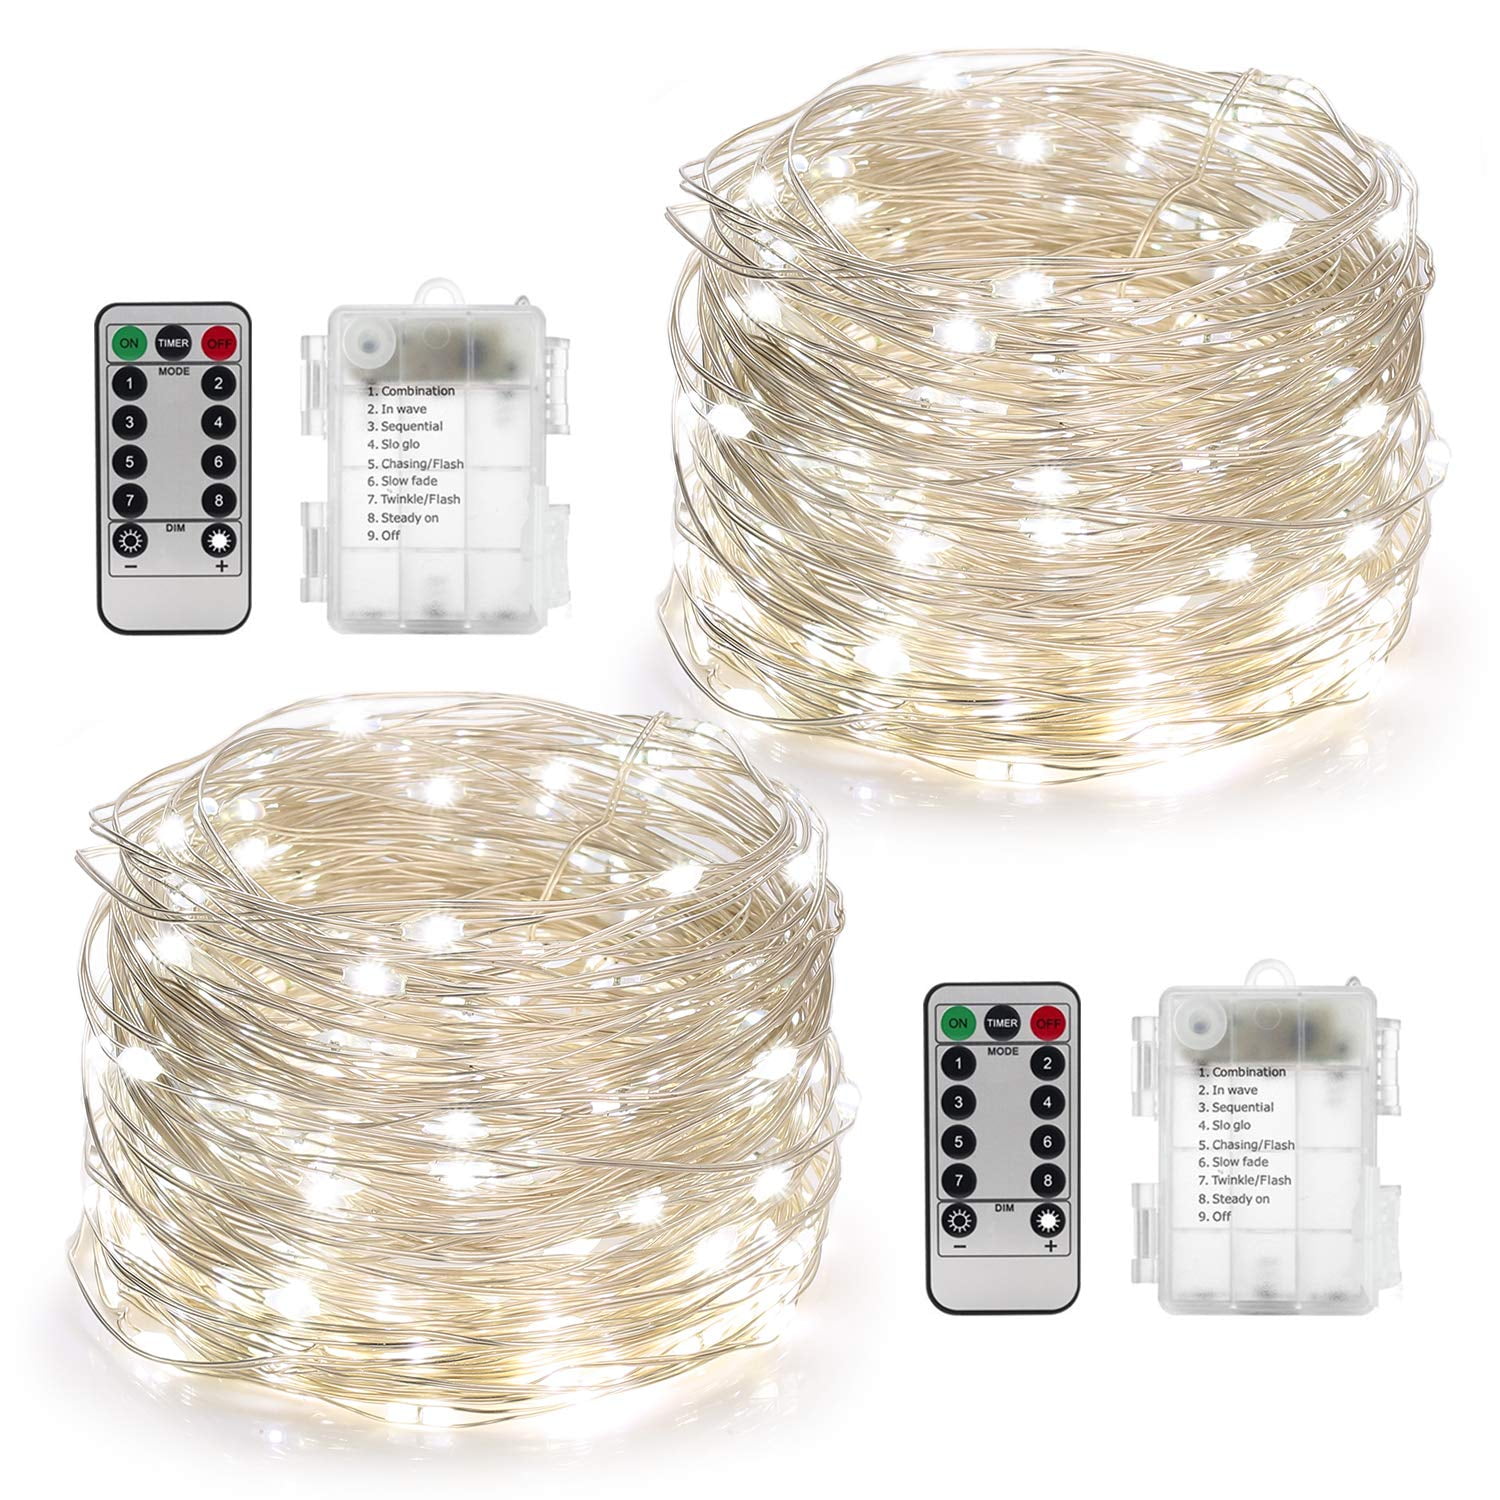 20/50/100 LED 33ft MICRO WIRE STRING FAIRY PARTY XMAS WEDDING CHRISTMAS LIGHT 